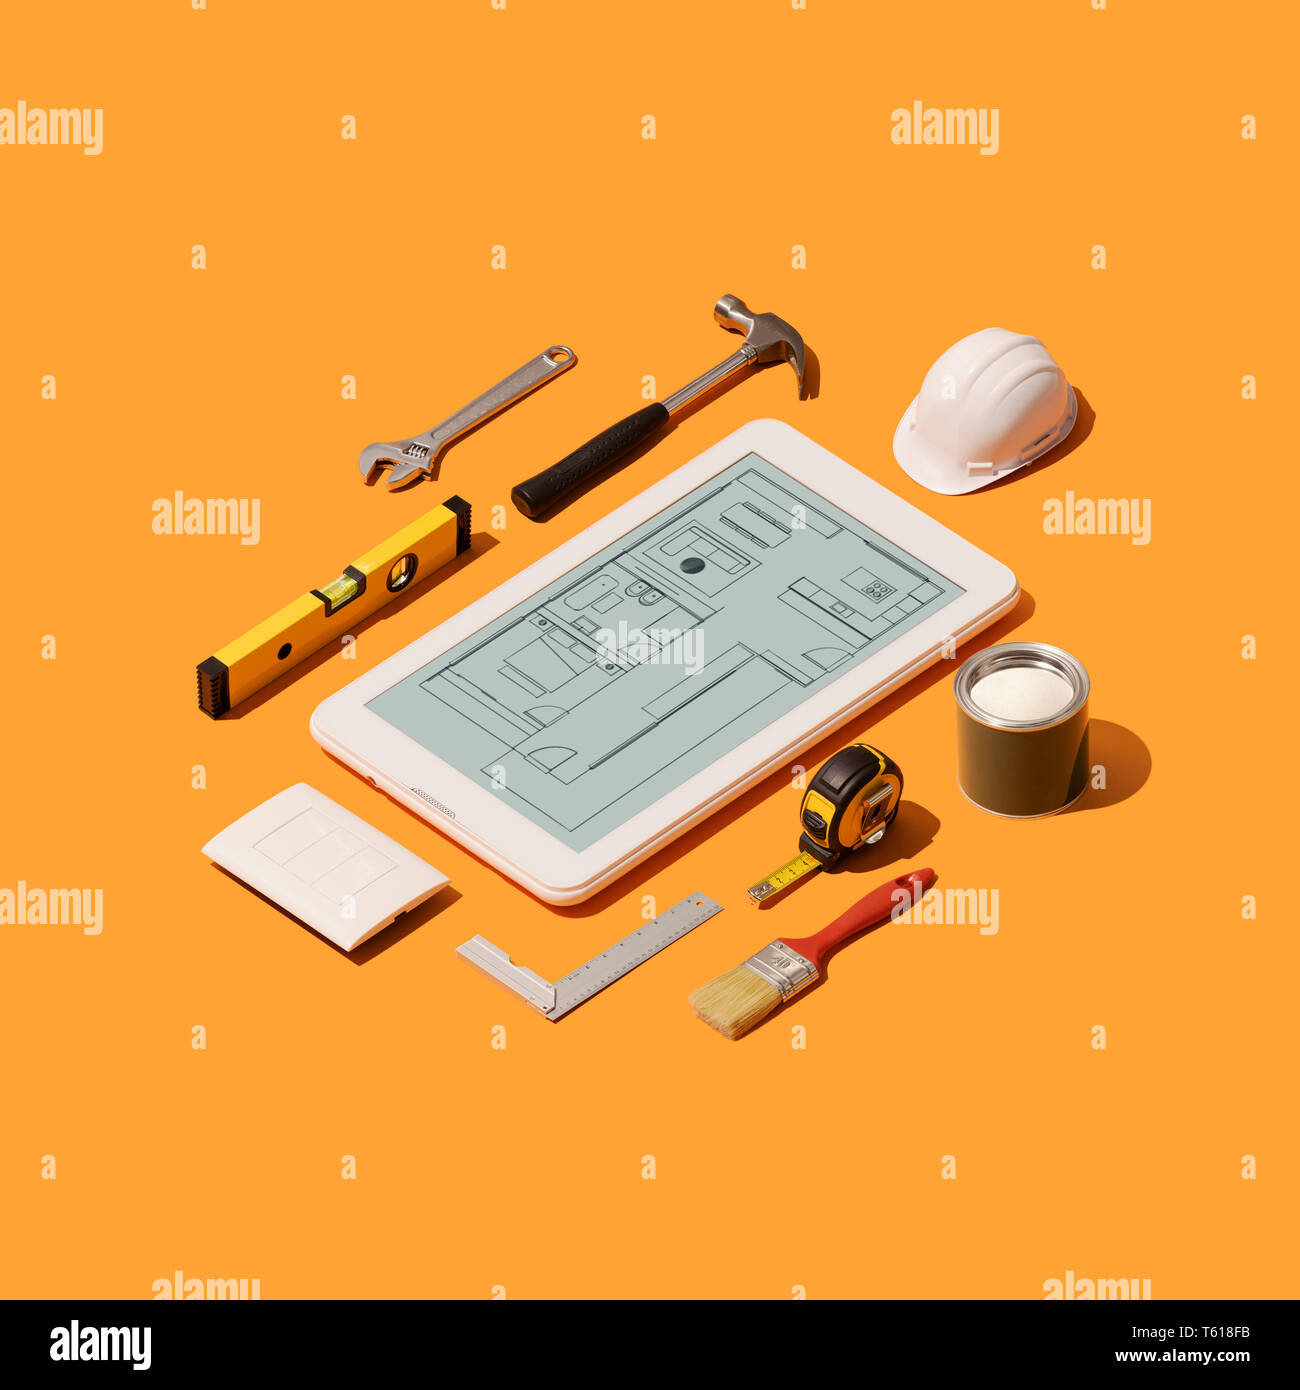 Home Renovation And Project Design App On A Touch Screen Tablet And Isometric Diy Construction Tools On A Smartphone Stock Photo Alamy